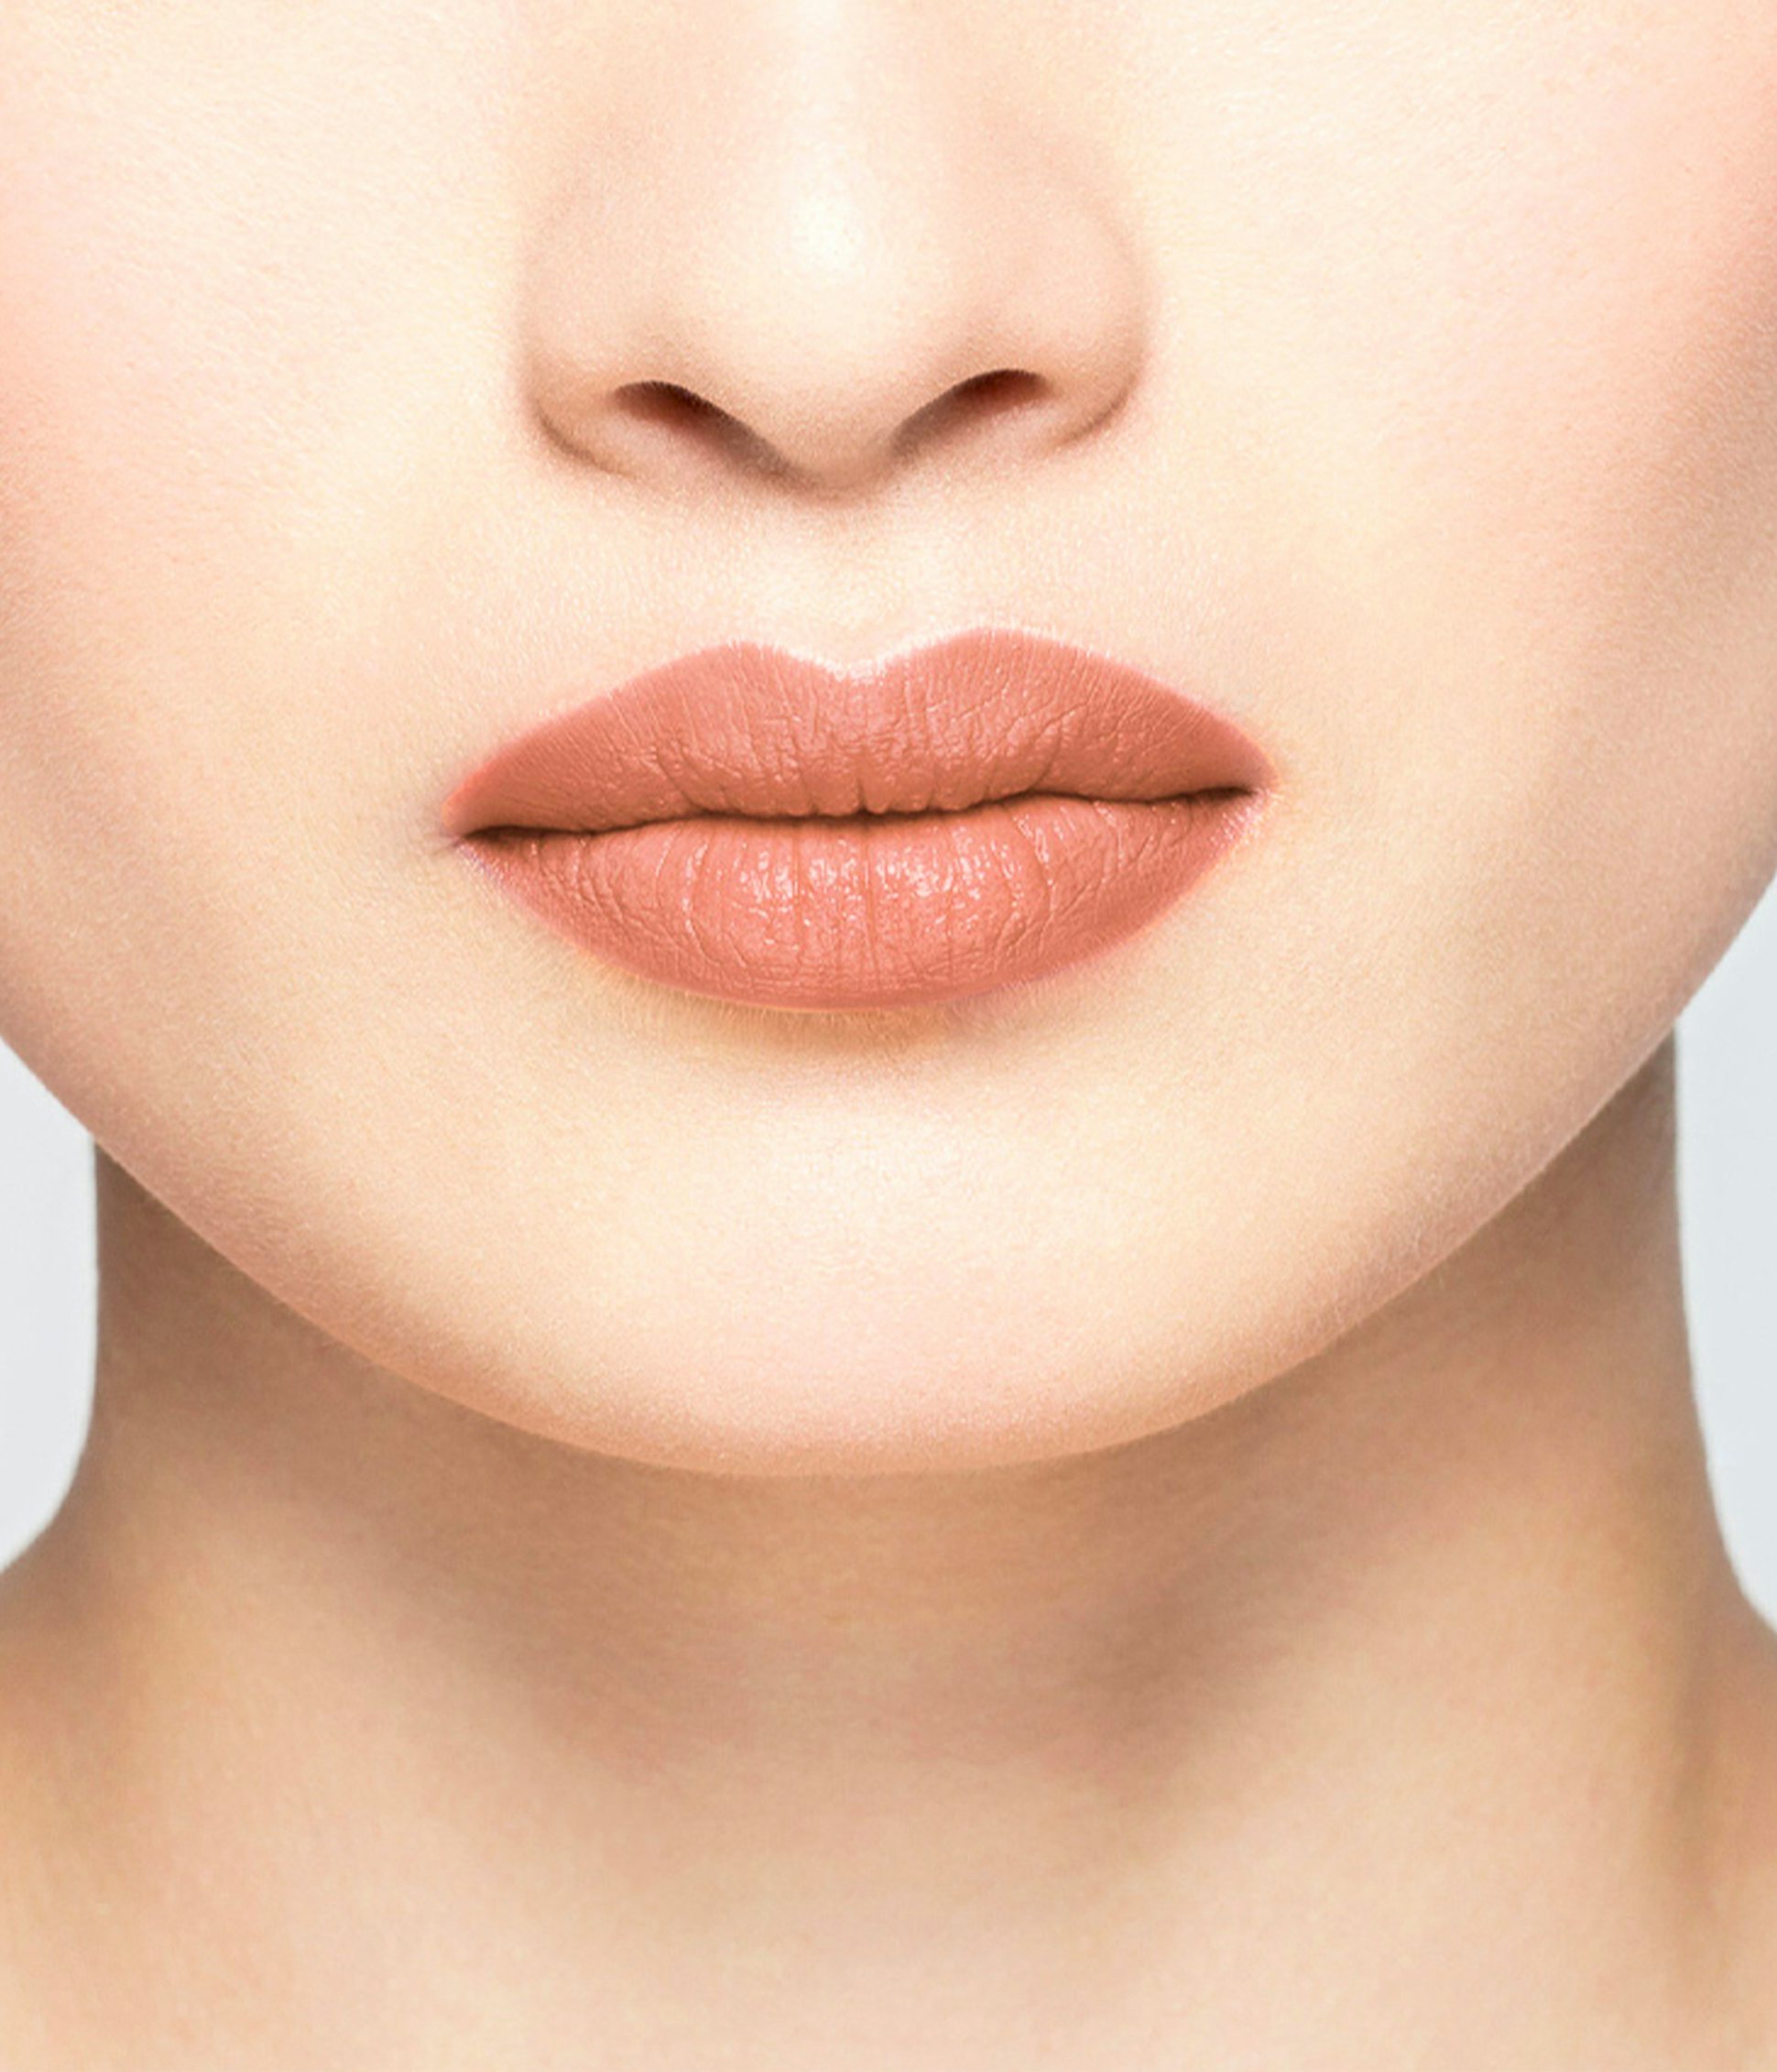 La bouche rouge Le Nude Elsa lipstick shade on the lips of an Asian model